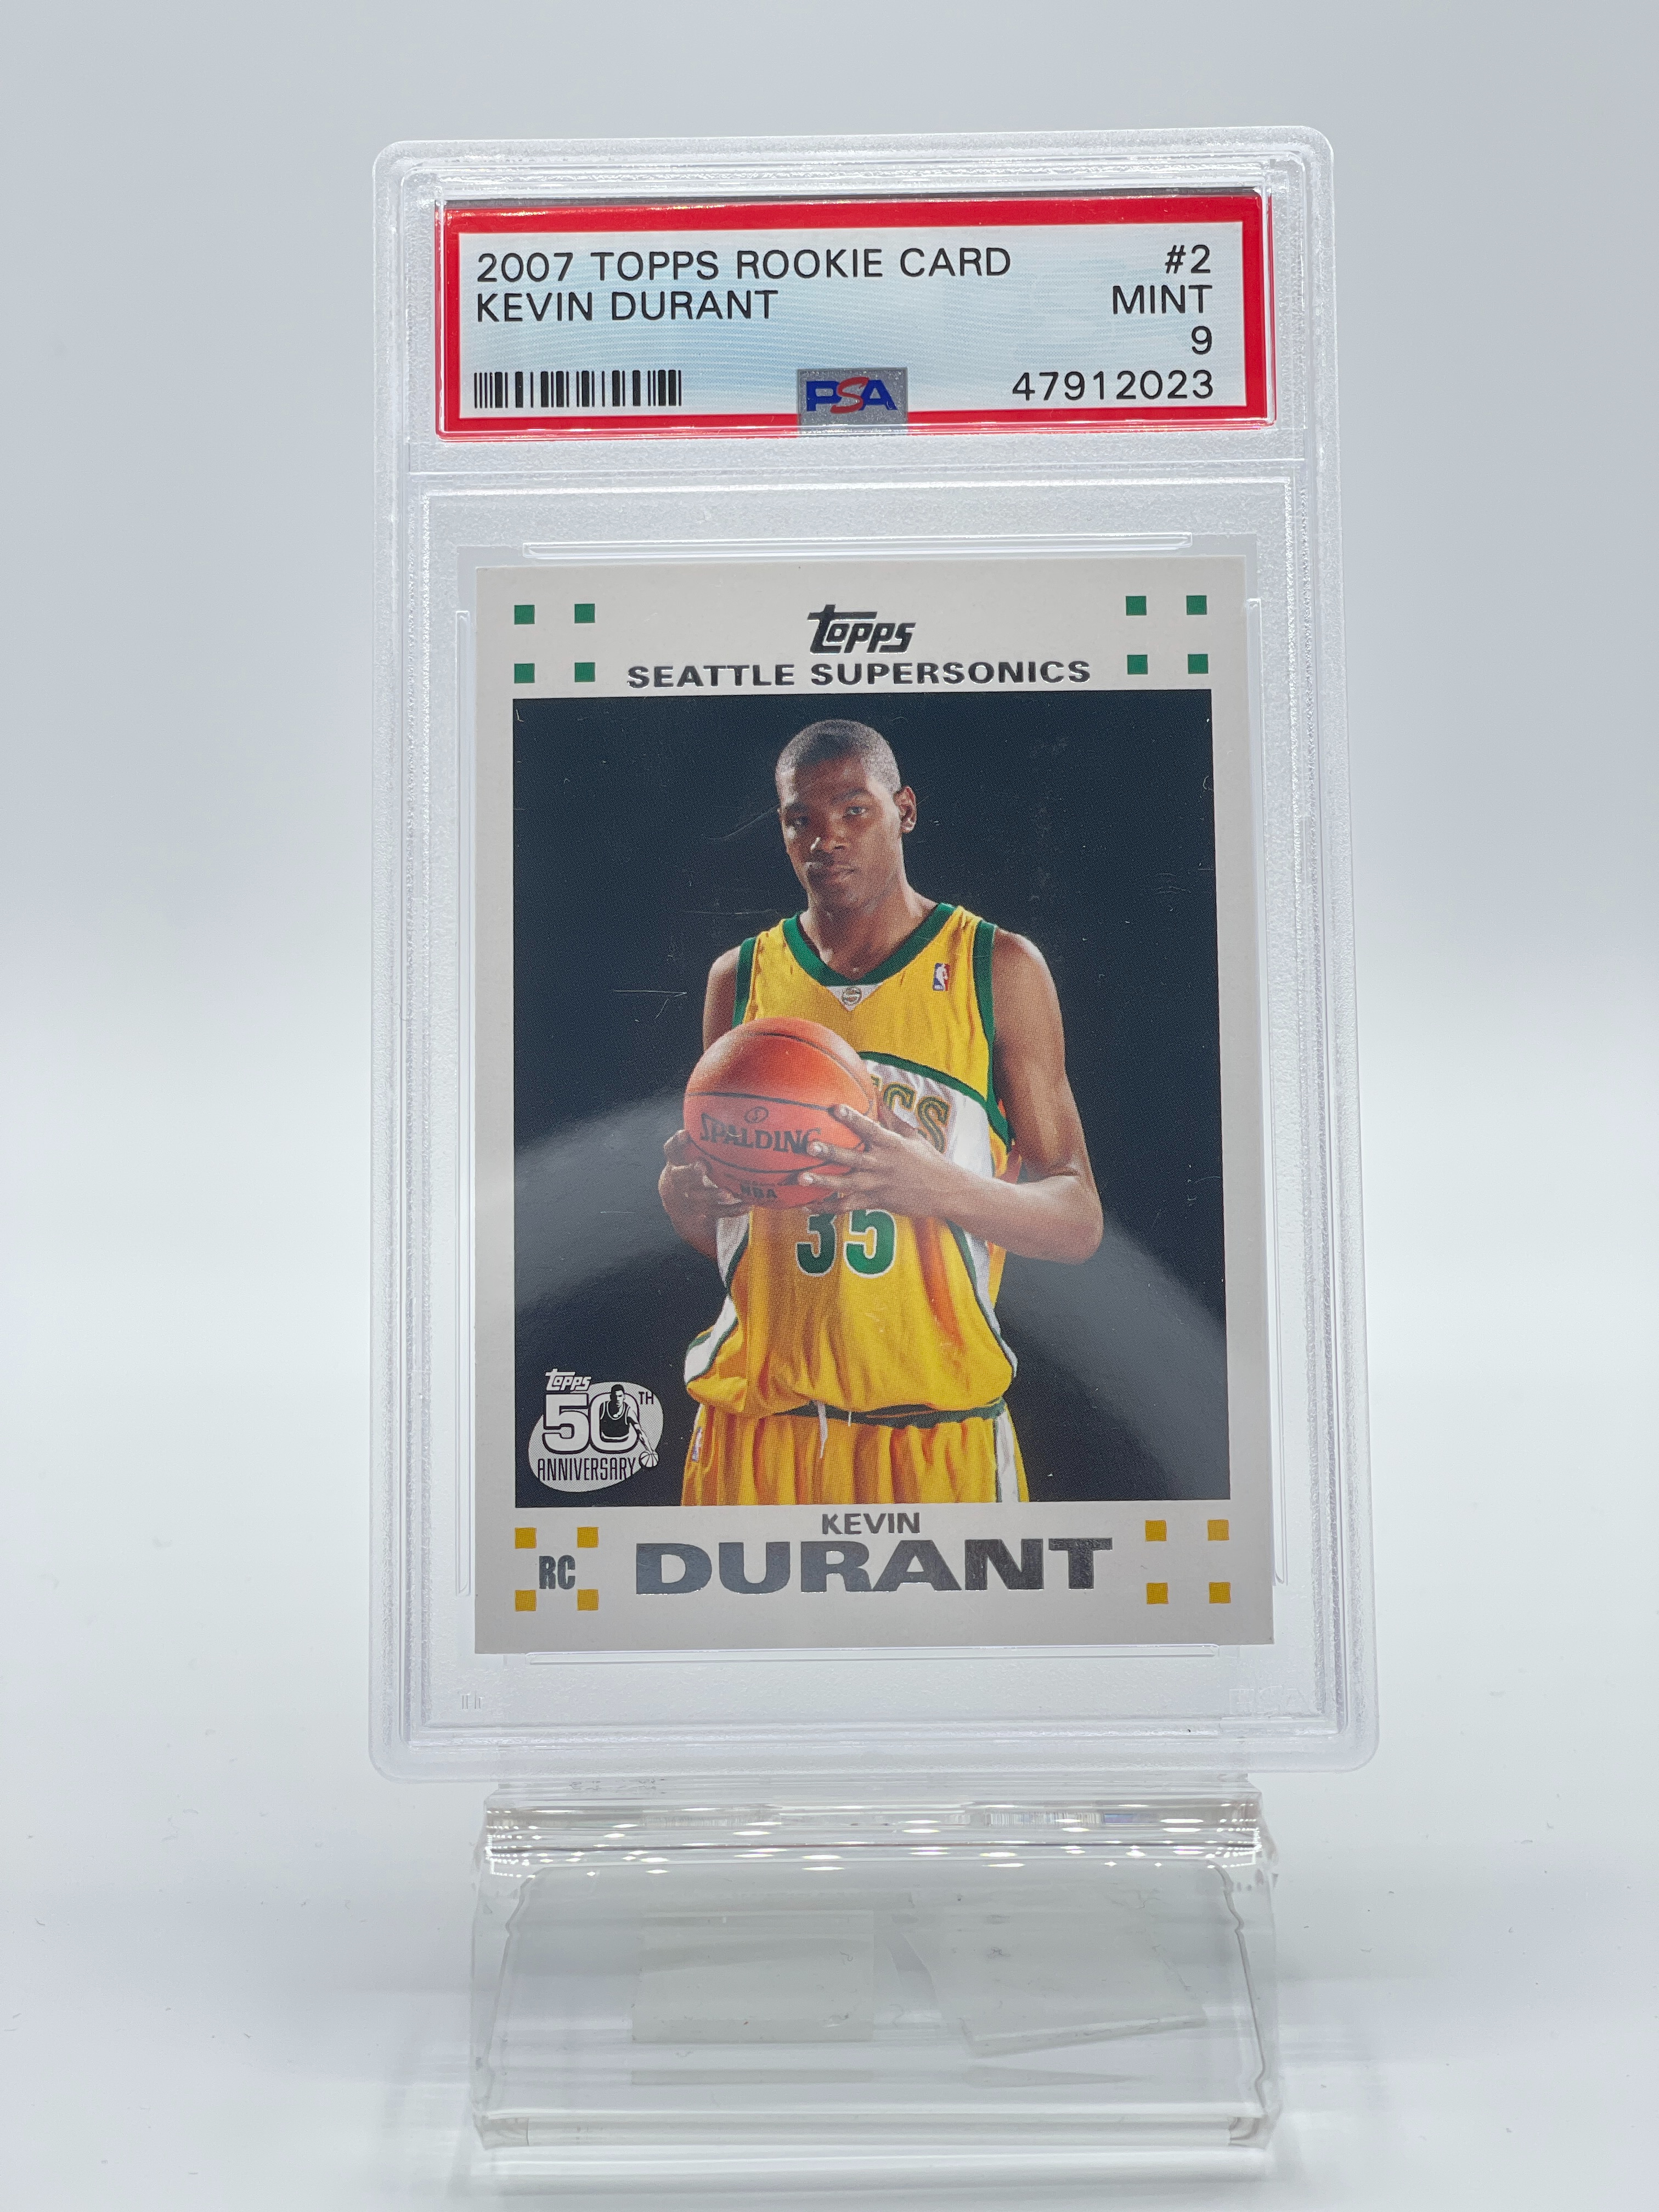 2007 Topps Kevin Durant Rookie Card PSA 9